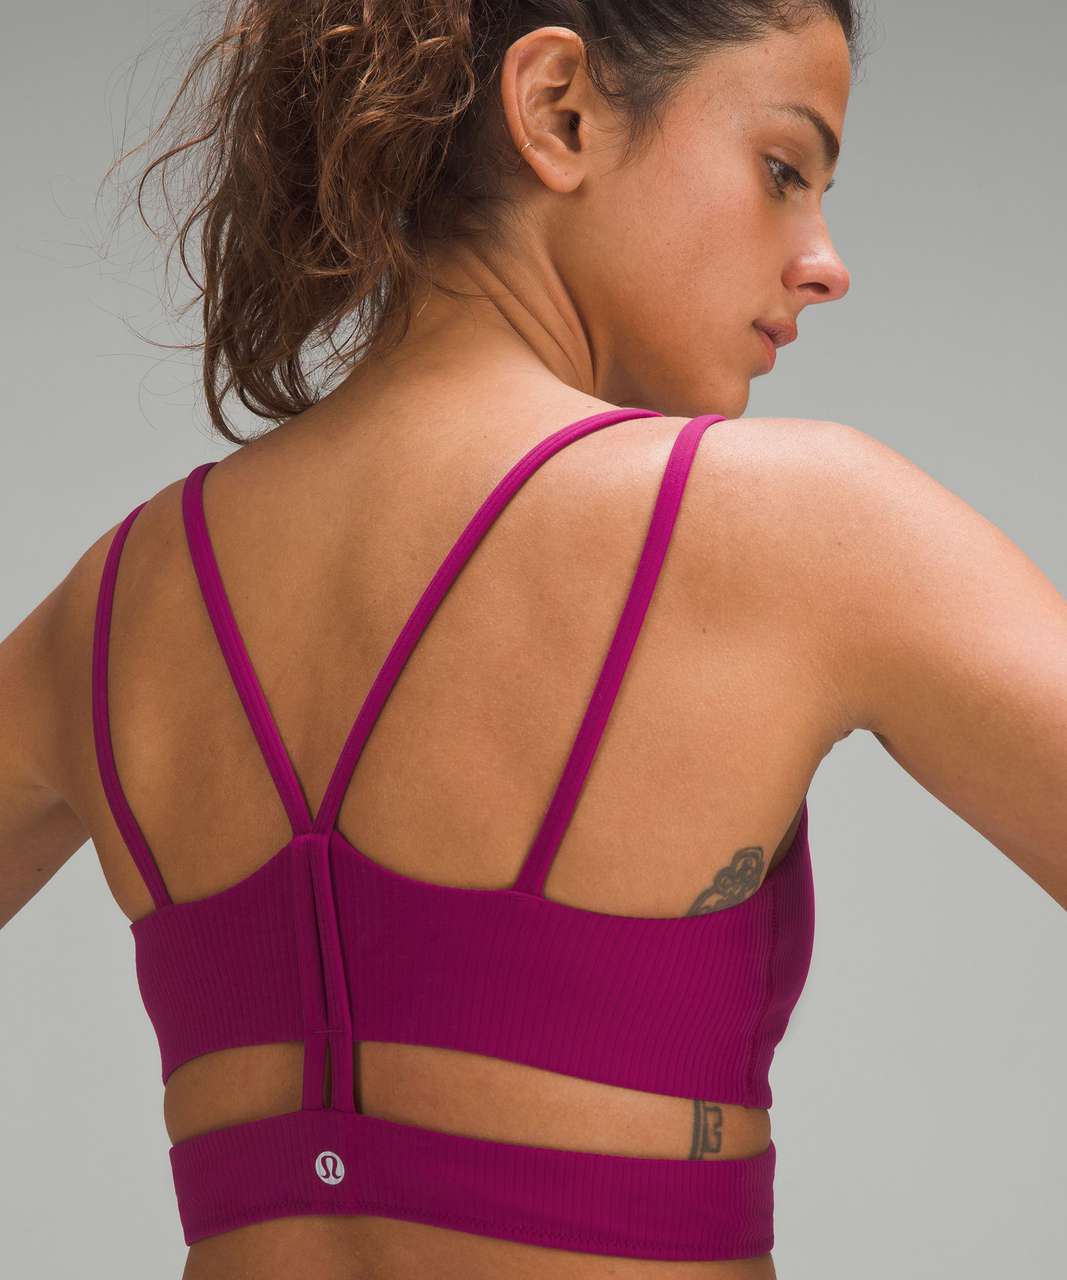 Lululemon Ribbed Nulu Strappy Yoga Bra Light Support, A/b Cup